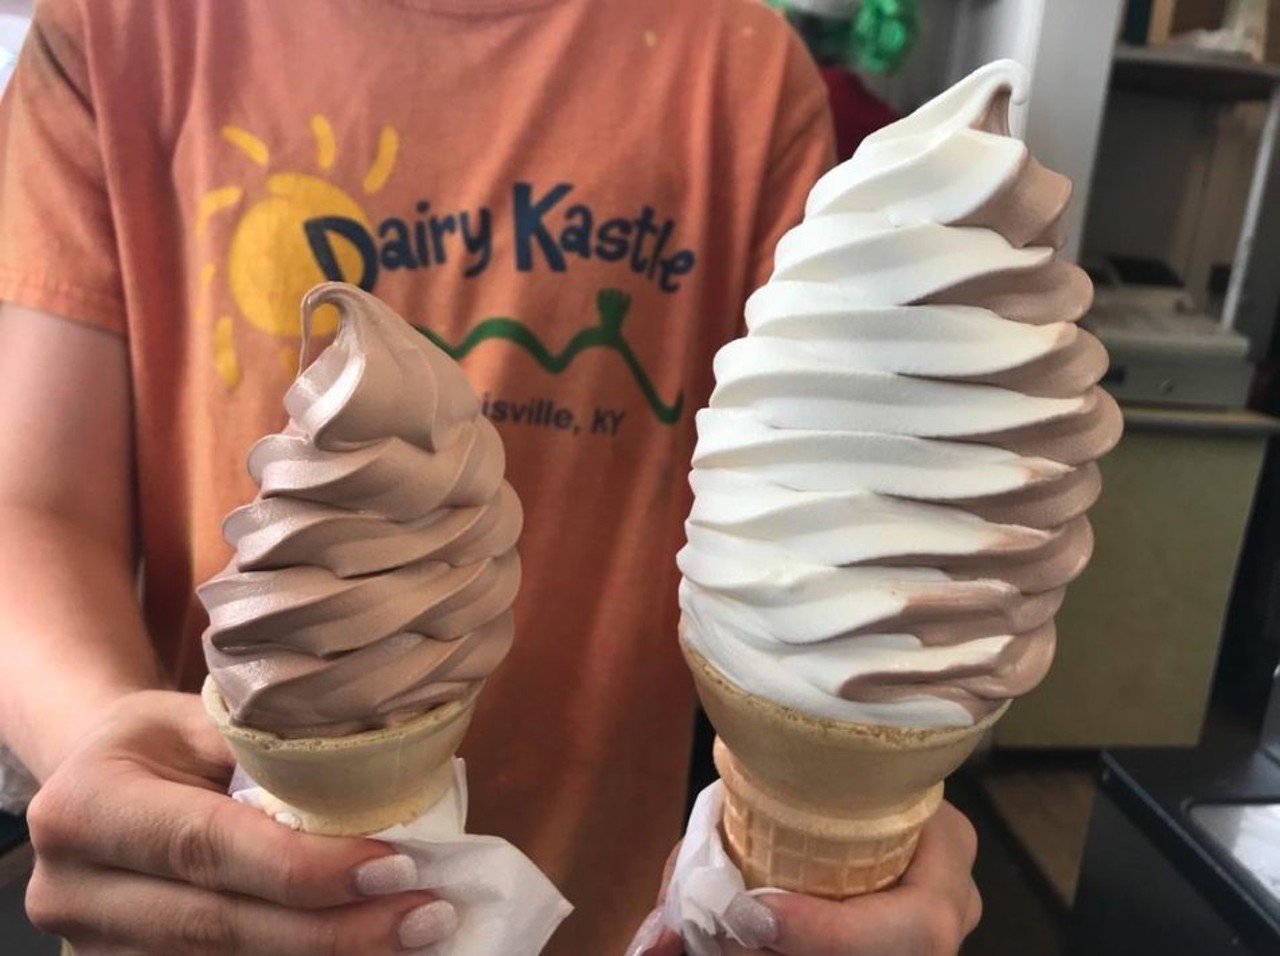 Dairy Kastle
575 Eastern Parkway
Some people say they know it&#146;s summer when they visit Dairy Kastle, although the Louisville institution is actually open for several months before and after the summer season. Besides ice cream, they also serve chili dogs, nachos, milkshakes, and other summer-favorite foods. 
Photo via Instagram.com/dairykastle/